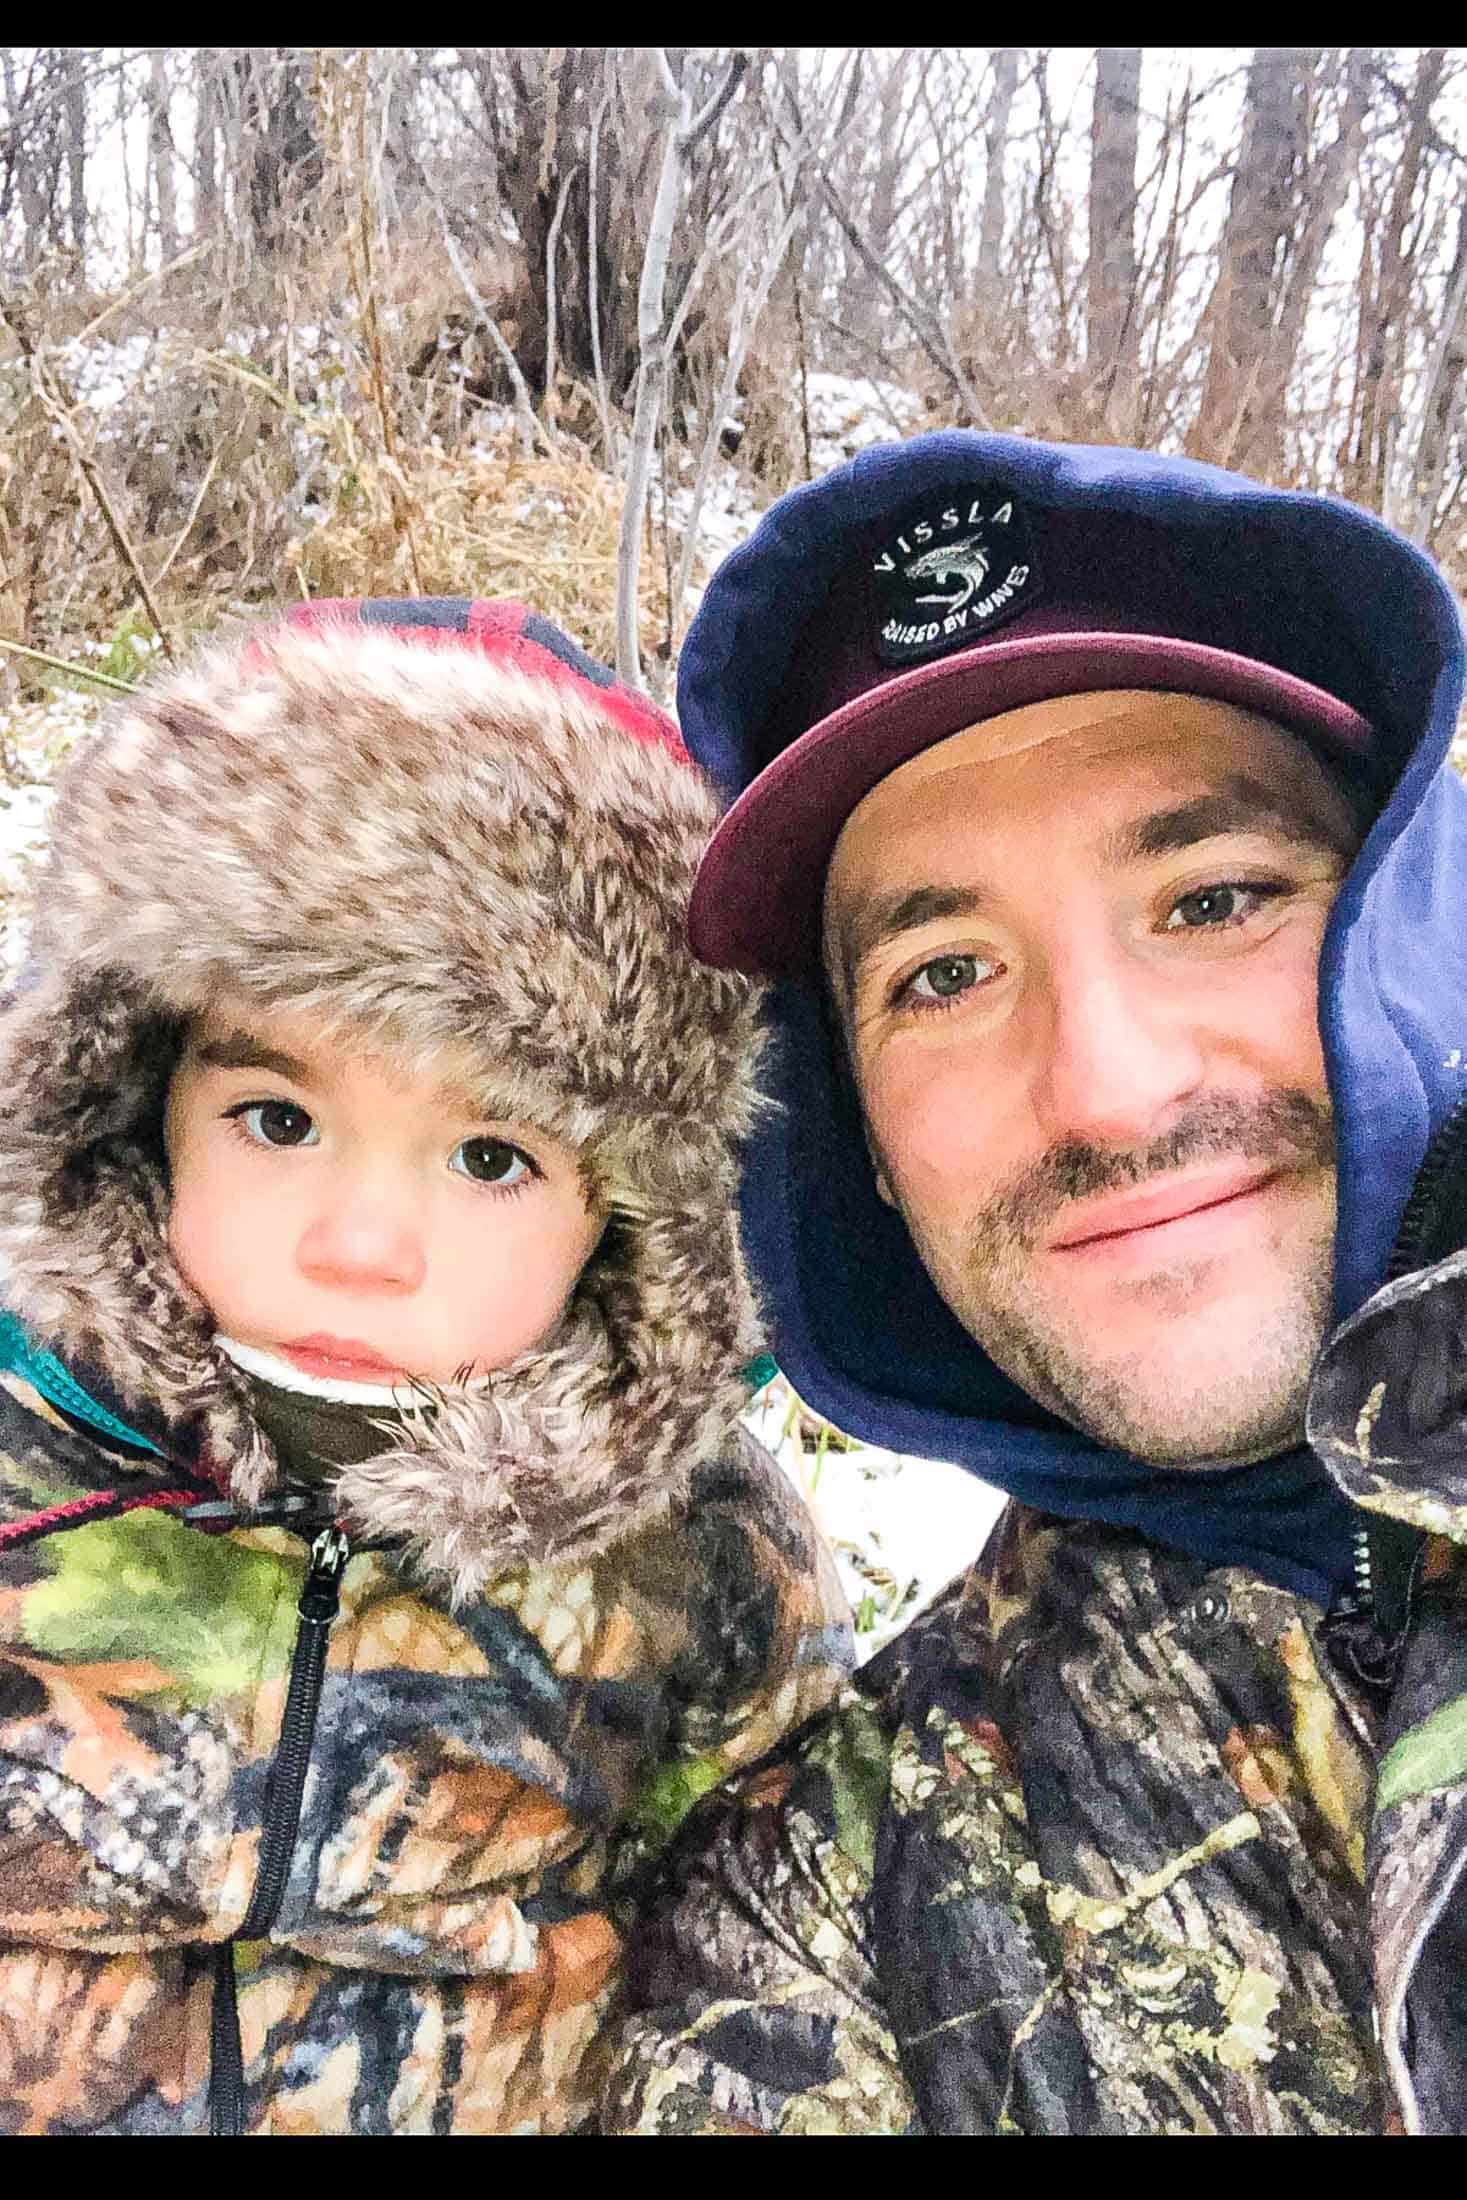 A father and son in warm hunting gear, surrounded by snow.